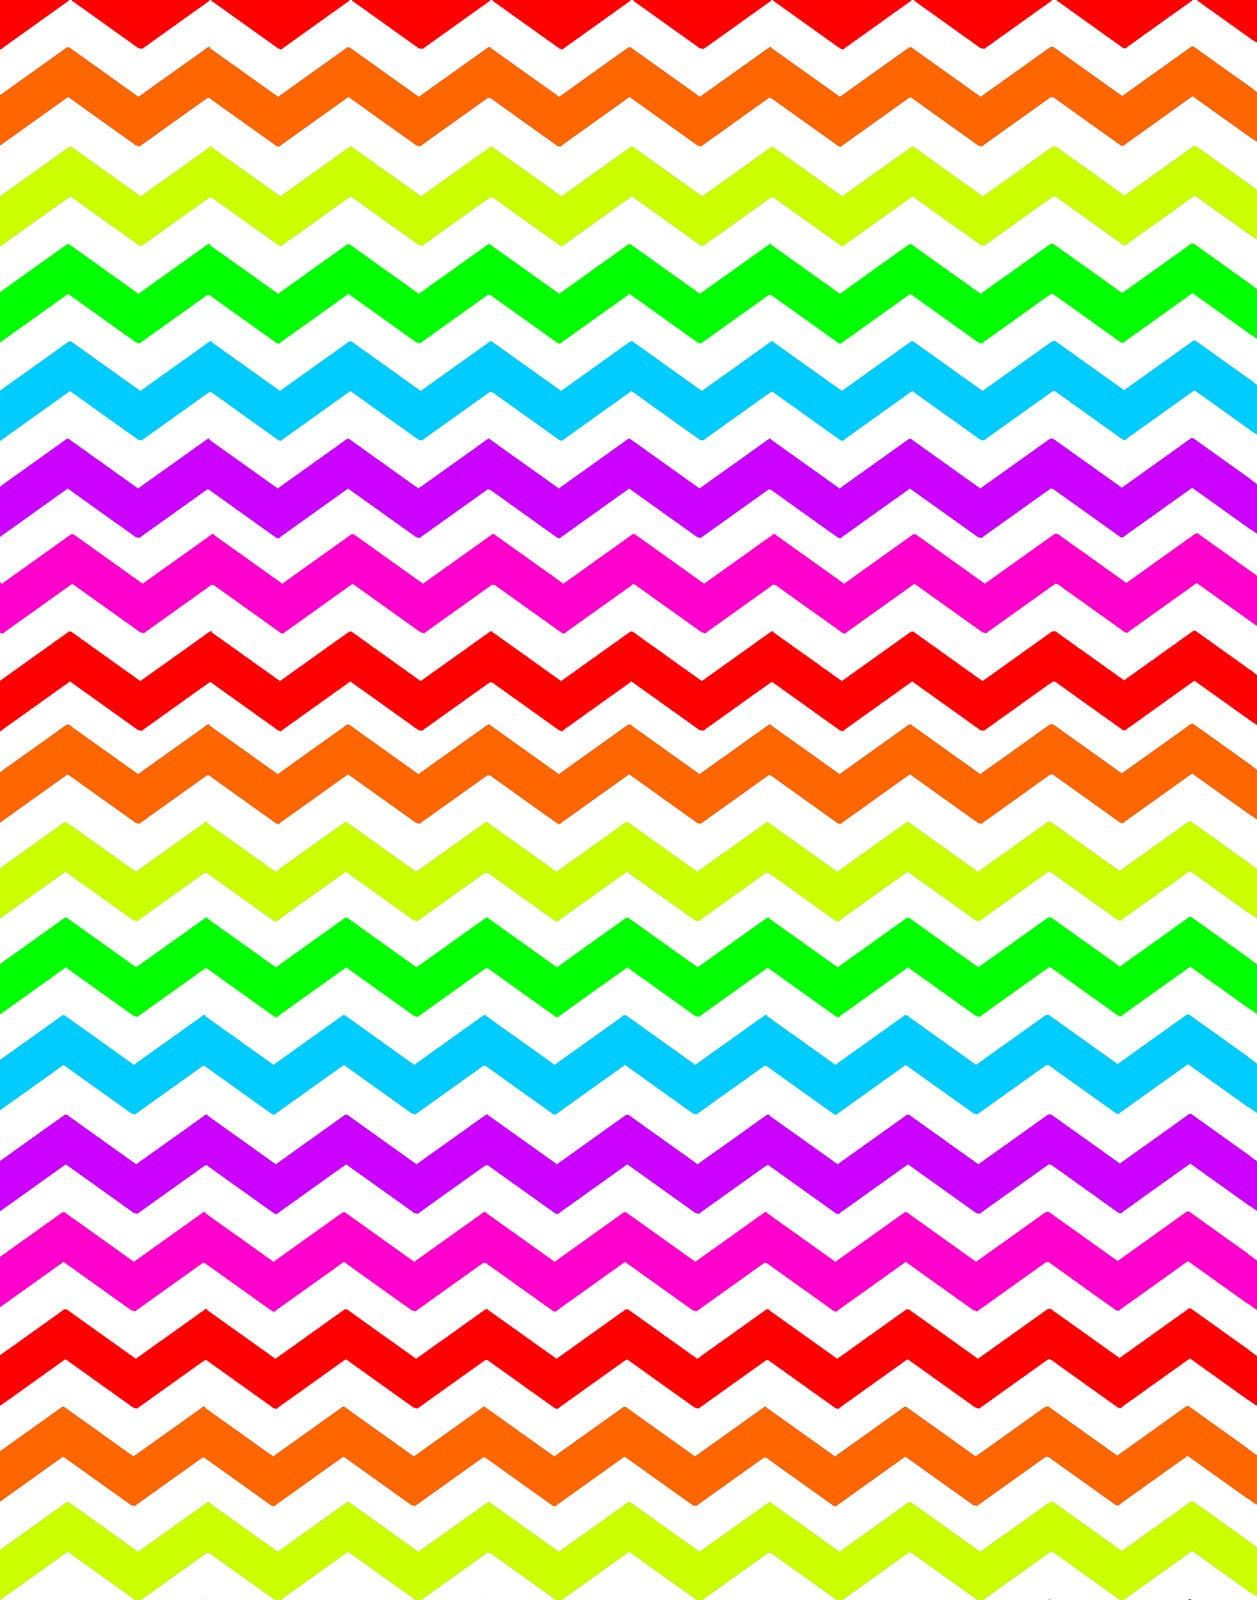 Doodlecraft: 16 New Colors Chevron Background Patterns! - Free Printable Wallpaper Patterns